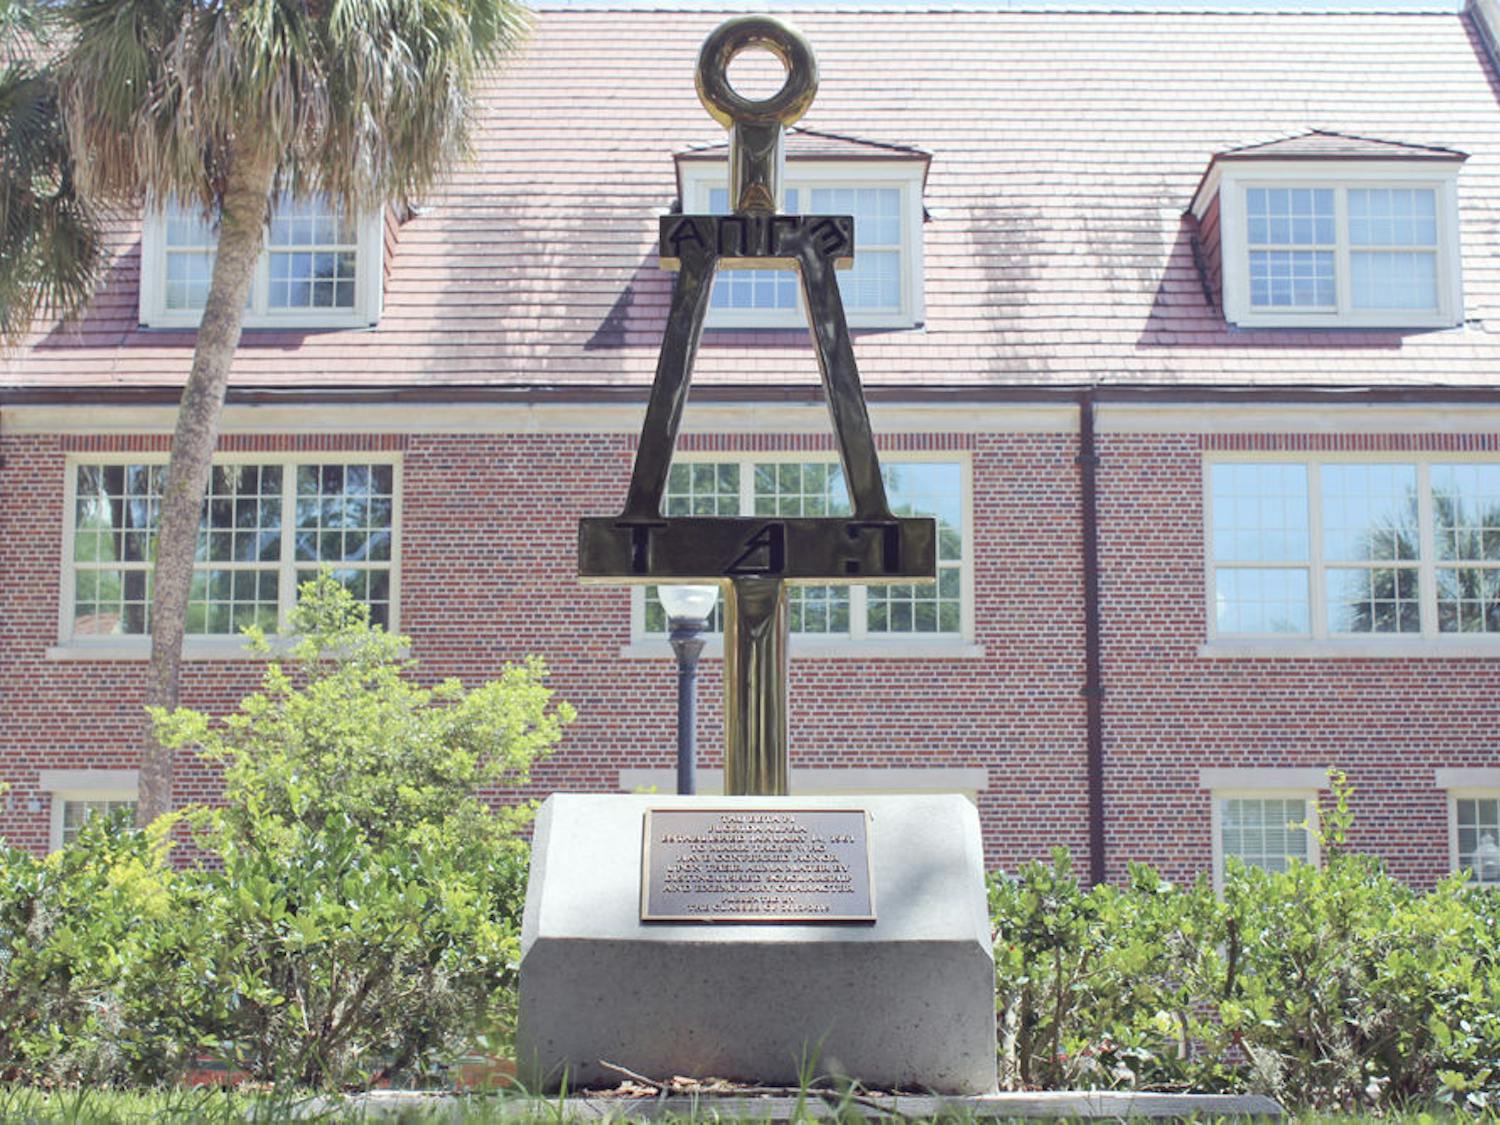 Pictured is the Tau Beta Phi monument titled “The Bent of Tau Beta Phi,” which will be officially unveiled today at 4:45 p.m. next to Weil Hall.